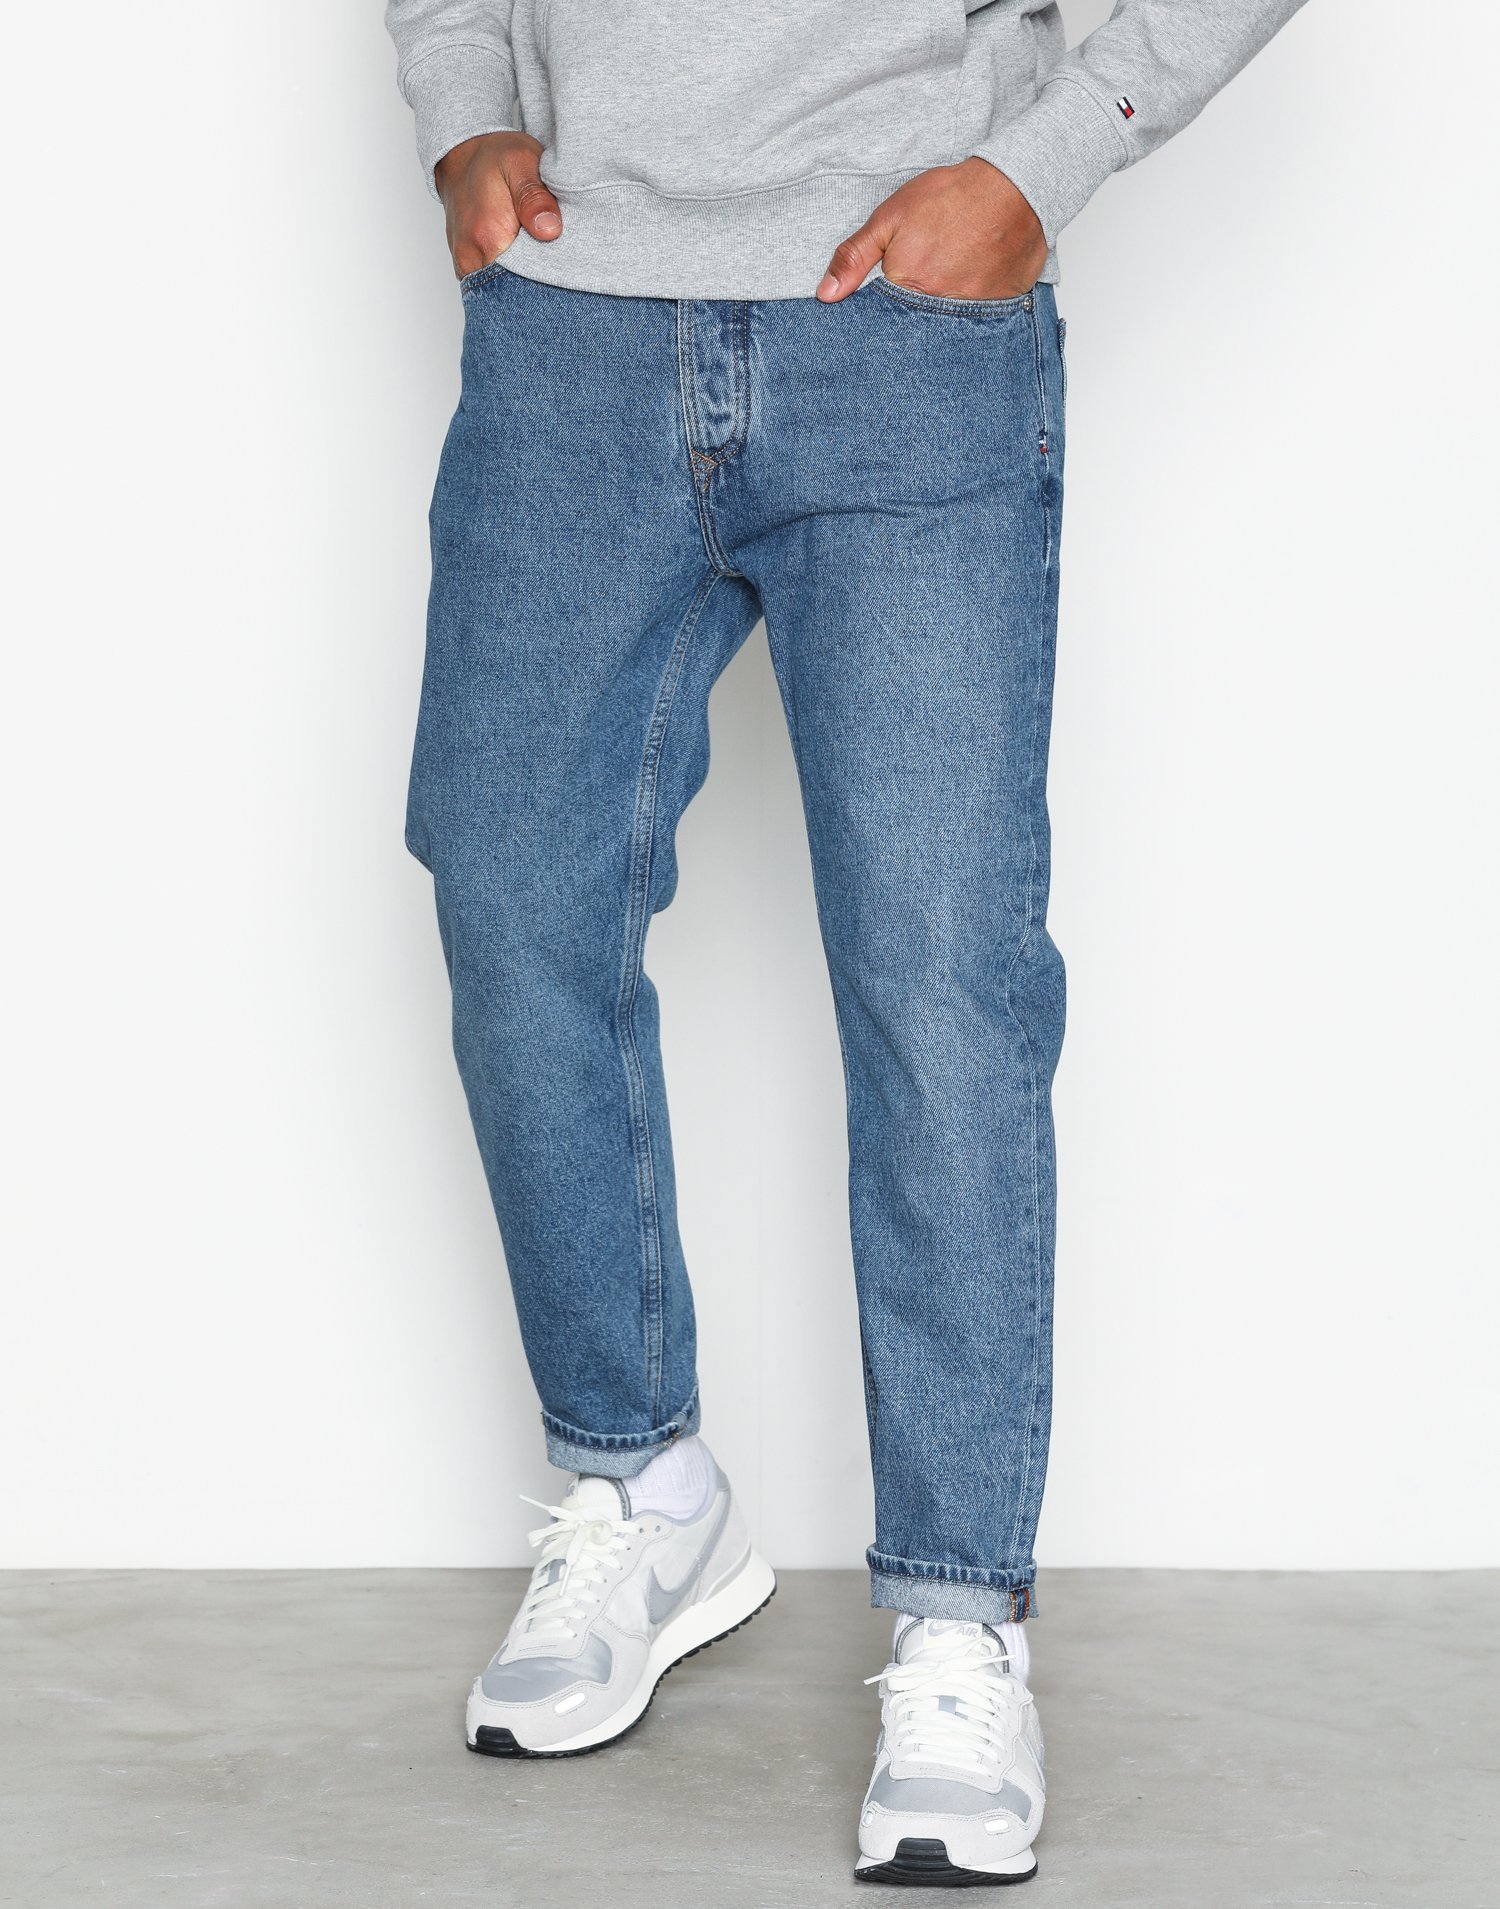 Relaxed Cropped Randy - Tommy Jeans - Mid Blue - Jeans - Clothing - Men ...